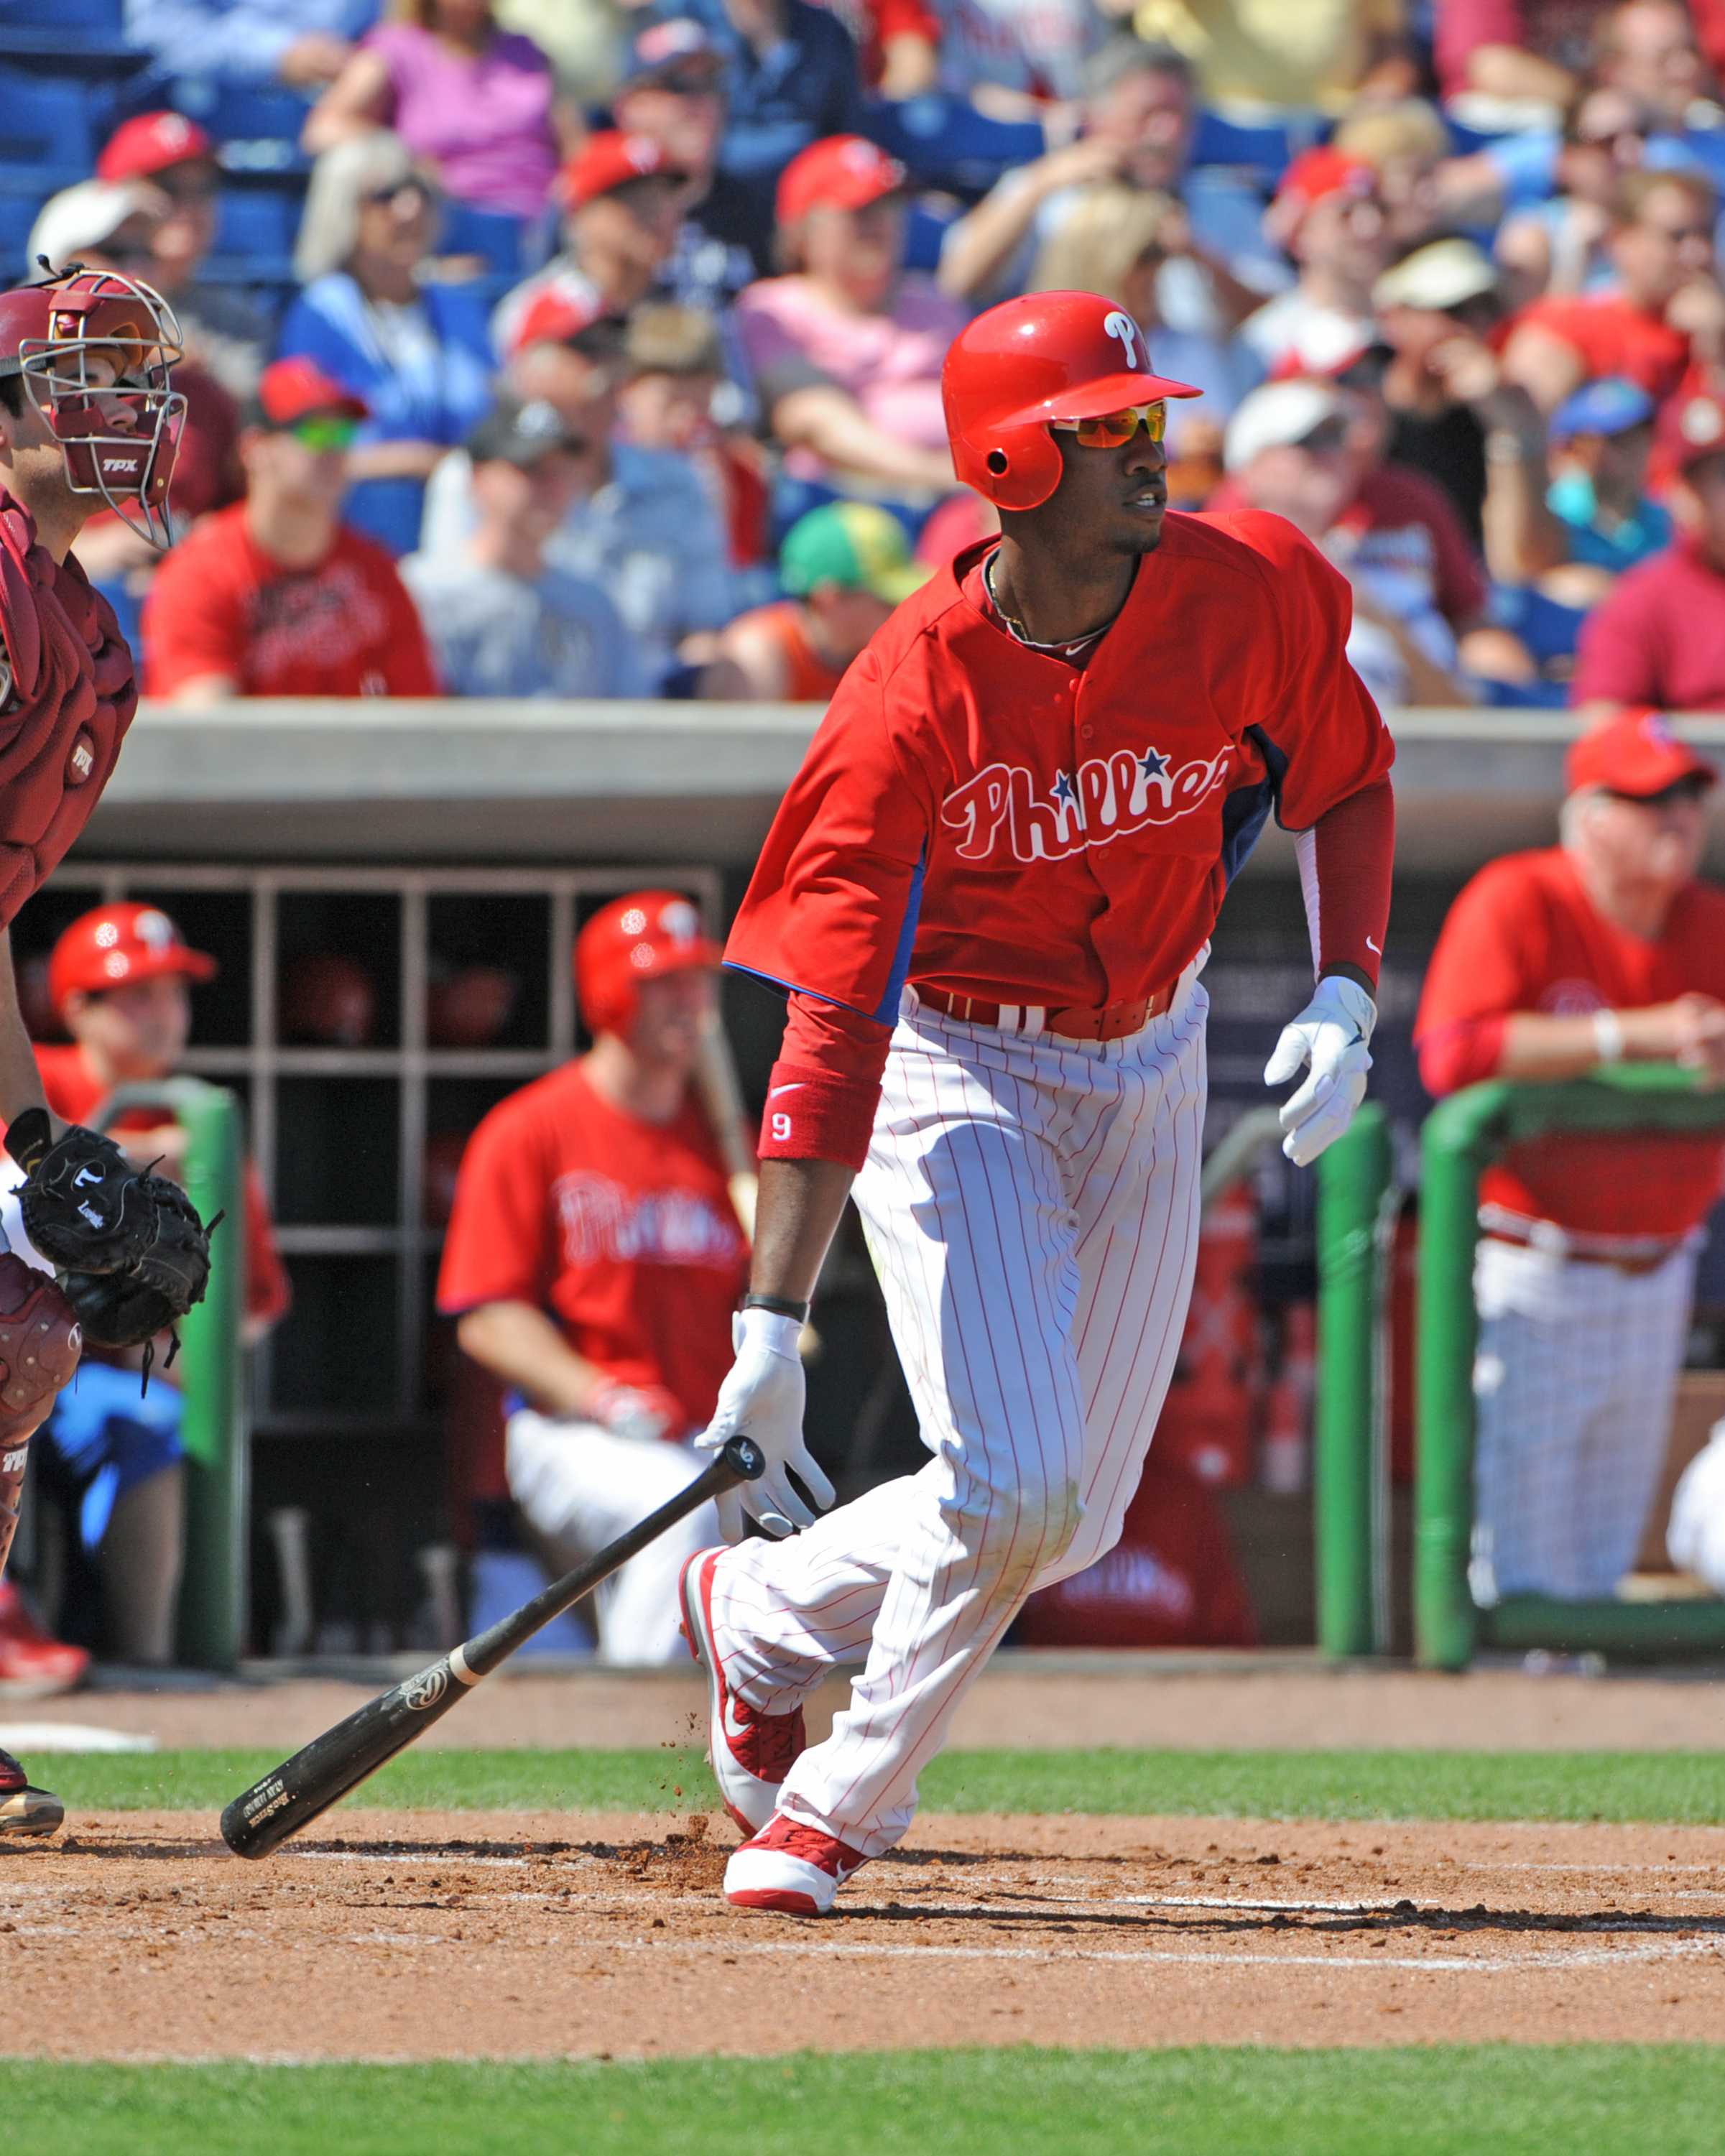 CLEARWATER, FL - FEBRUARY 24:  Outfielder Domonic Brown #9 of the Philadelphia Phillies singles in the first inning against the Florida State Seminoles February 24, 2011 at Bright House Field in Clearwater, Florida.  (Photo by Al Messerschmidt/Getty Image